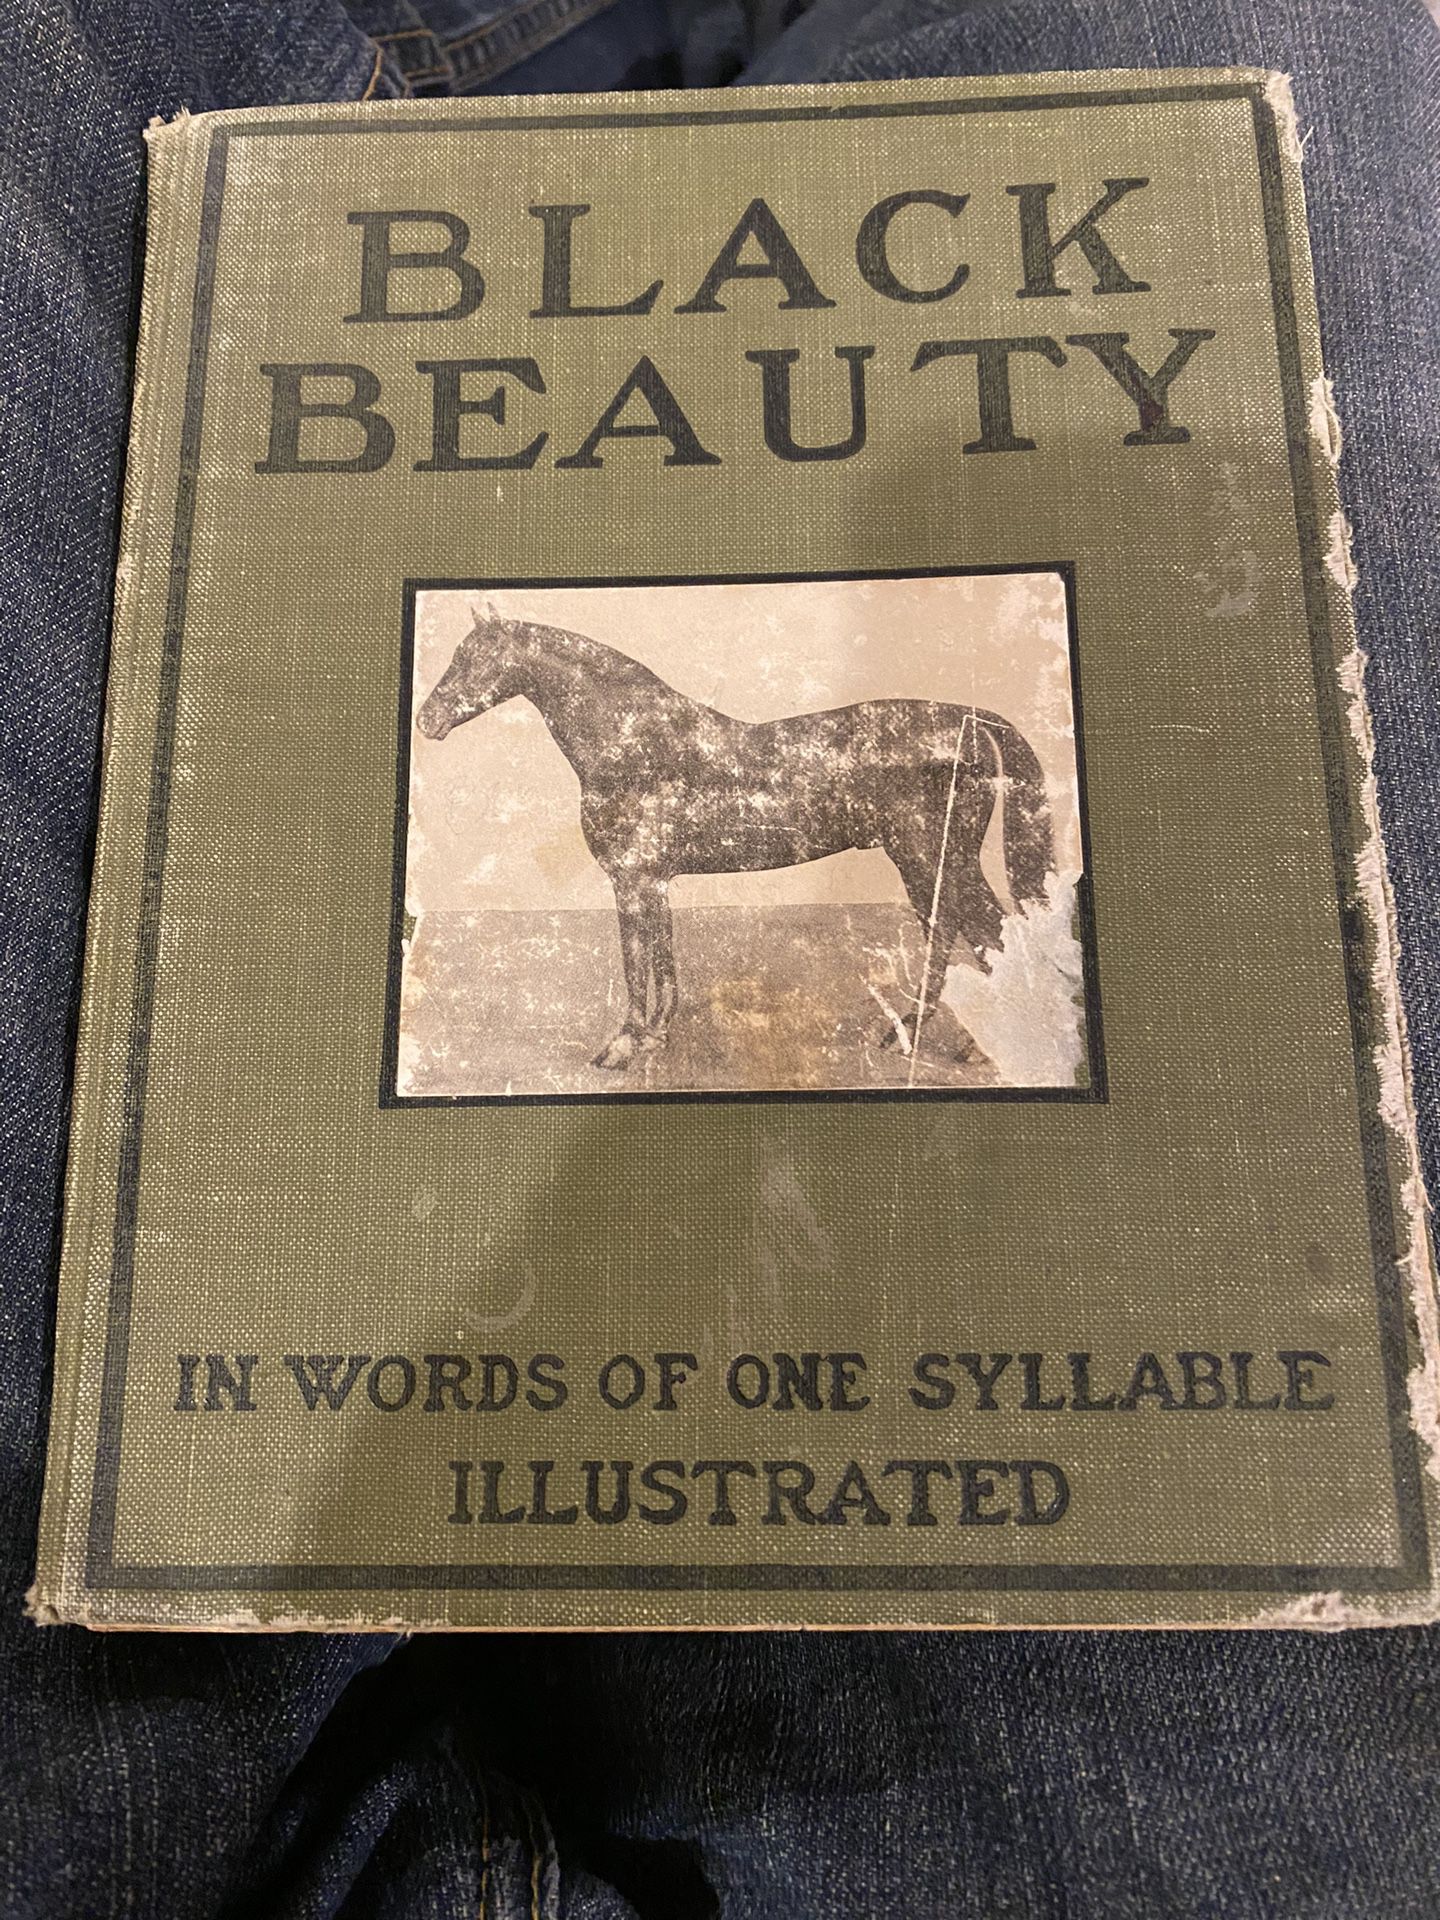 Black beauty Book From 1905 